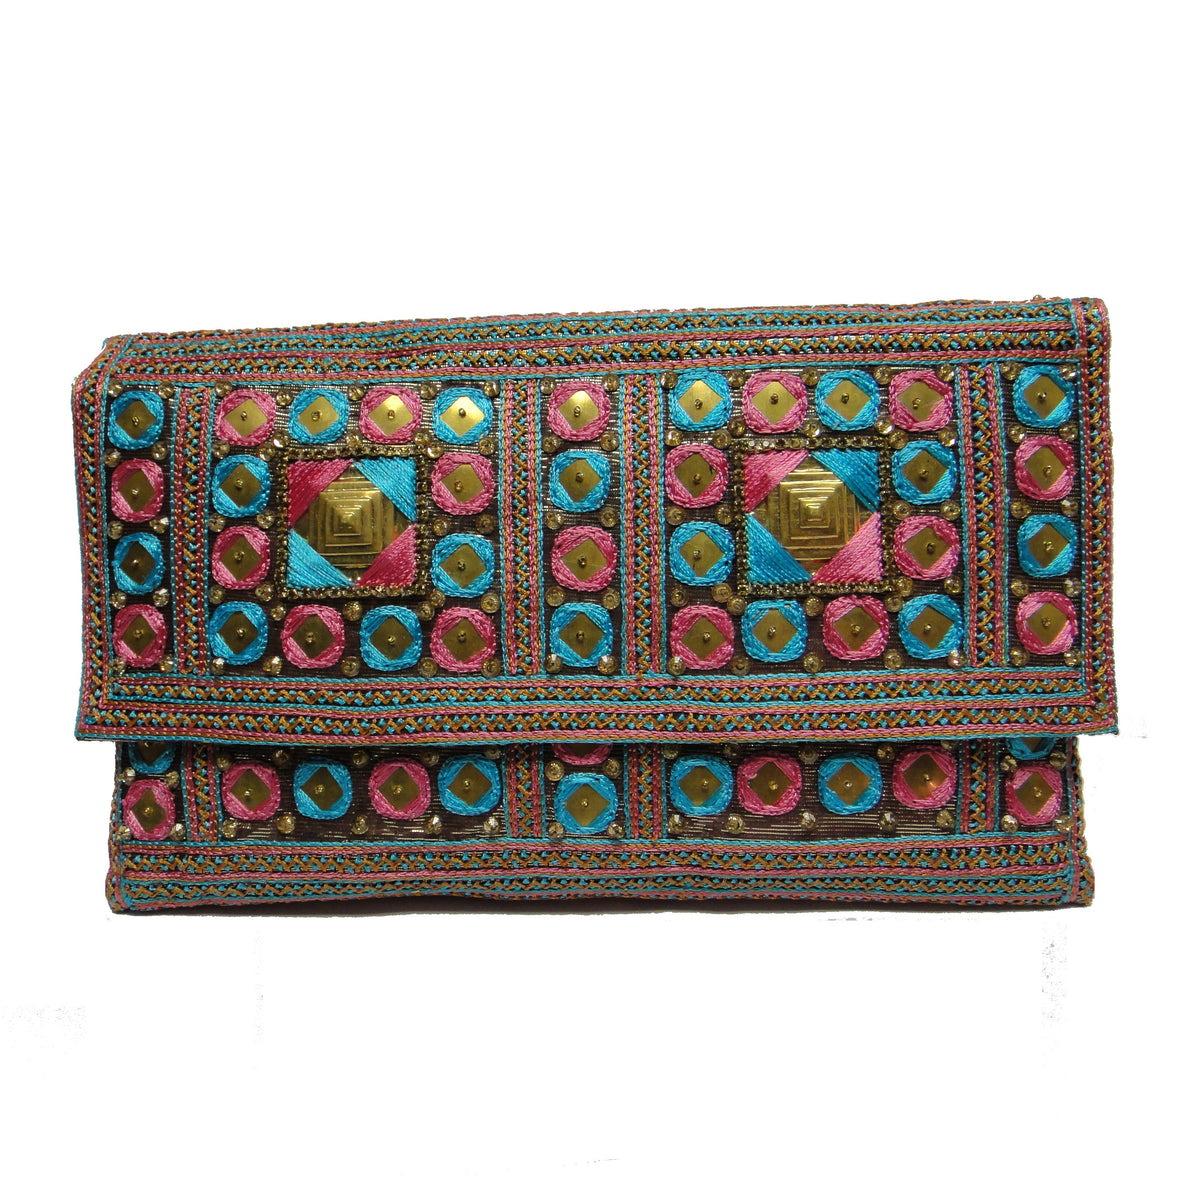 Beaded Fuchsia and Turquoise Mirrored Clutch